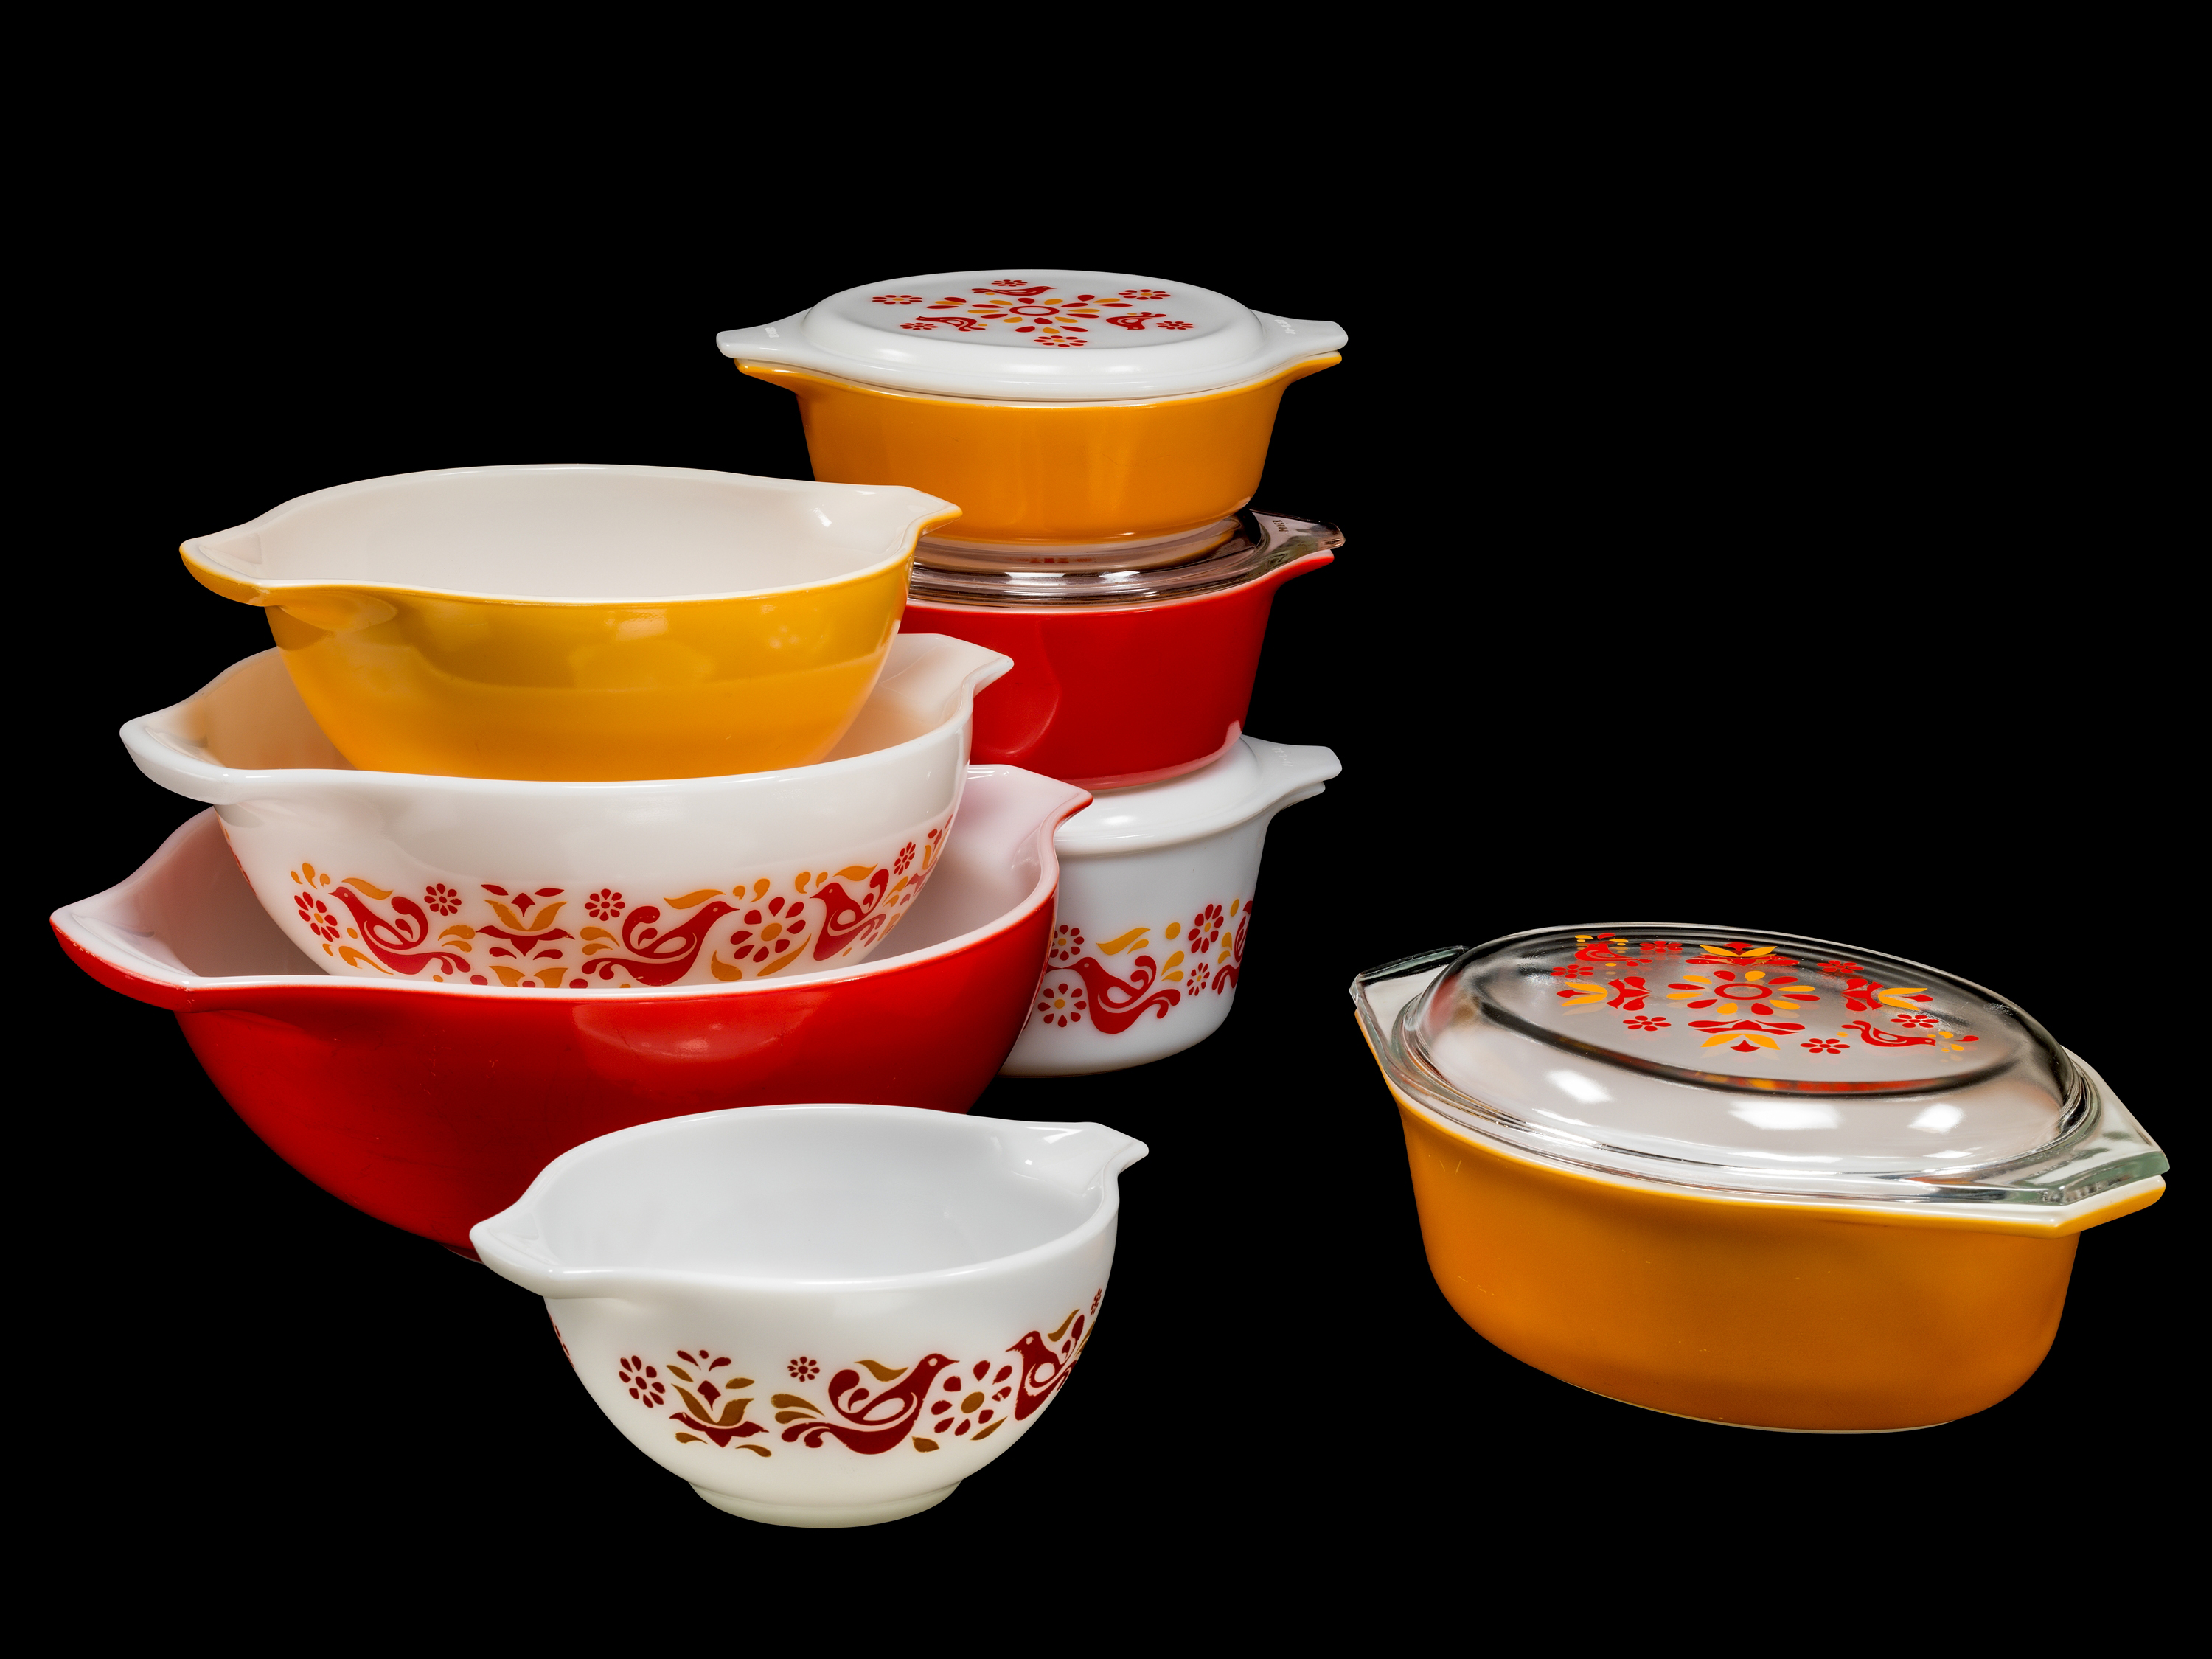 Pyrex bowls and casserole dishes were found in almost every U.S. kitchen for decades